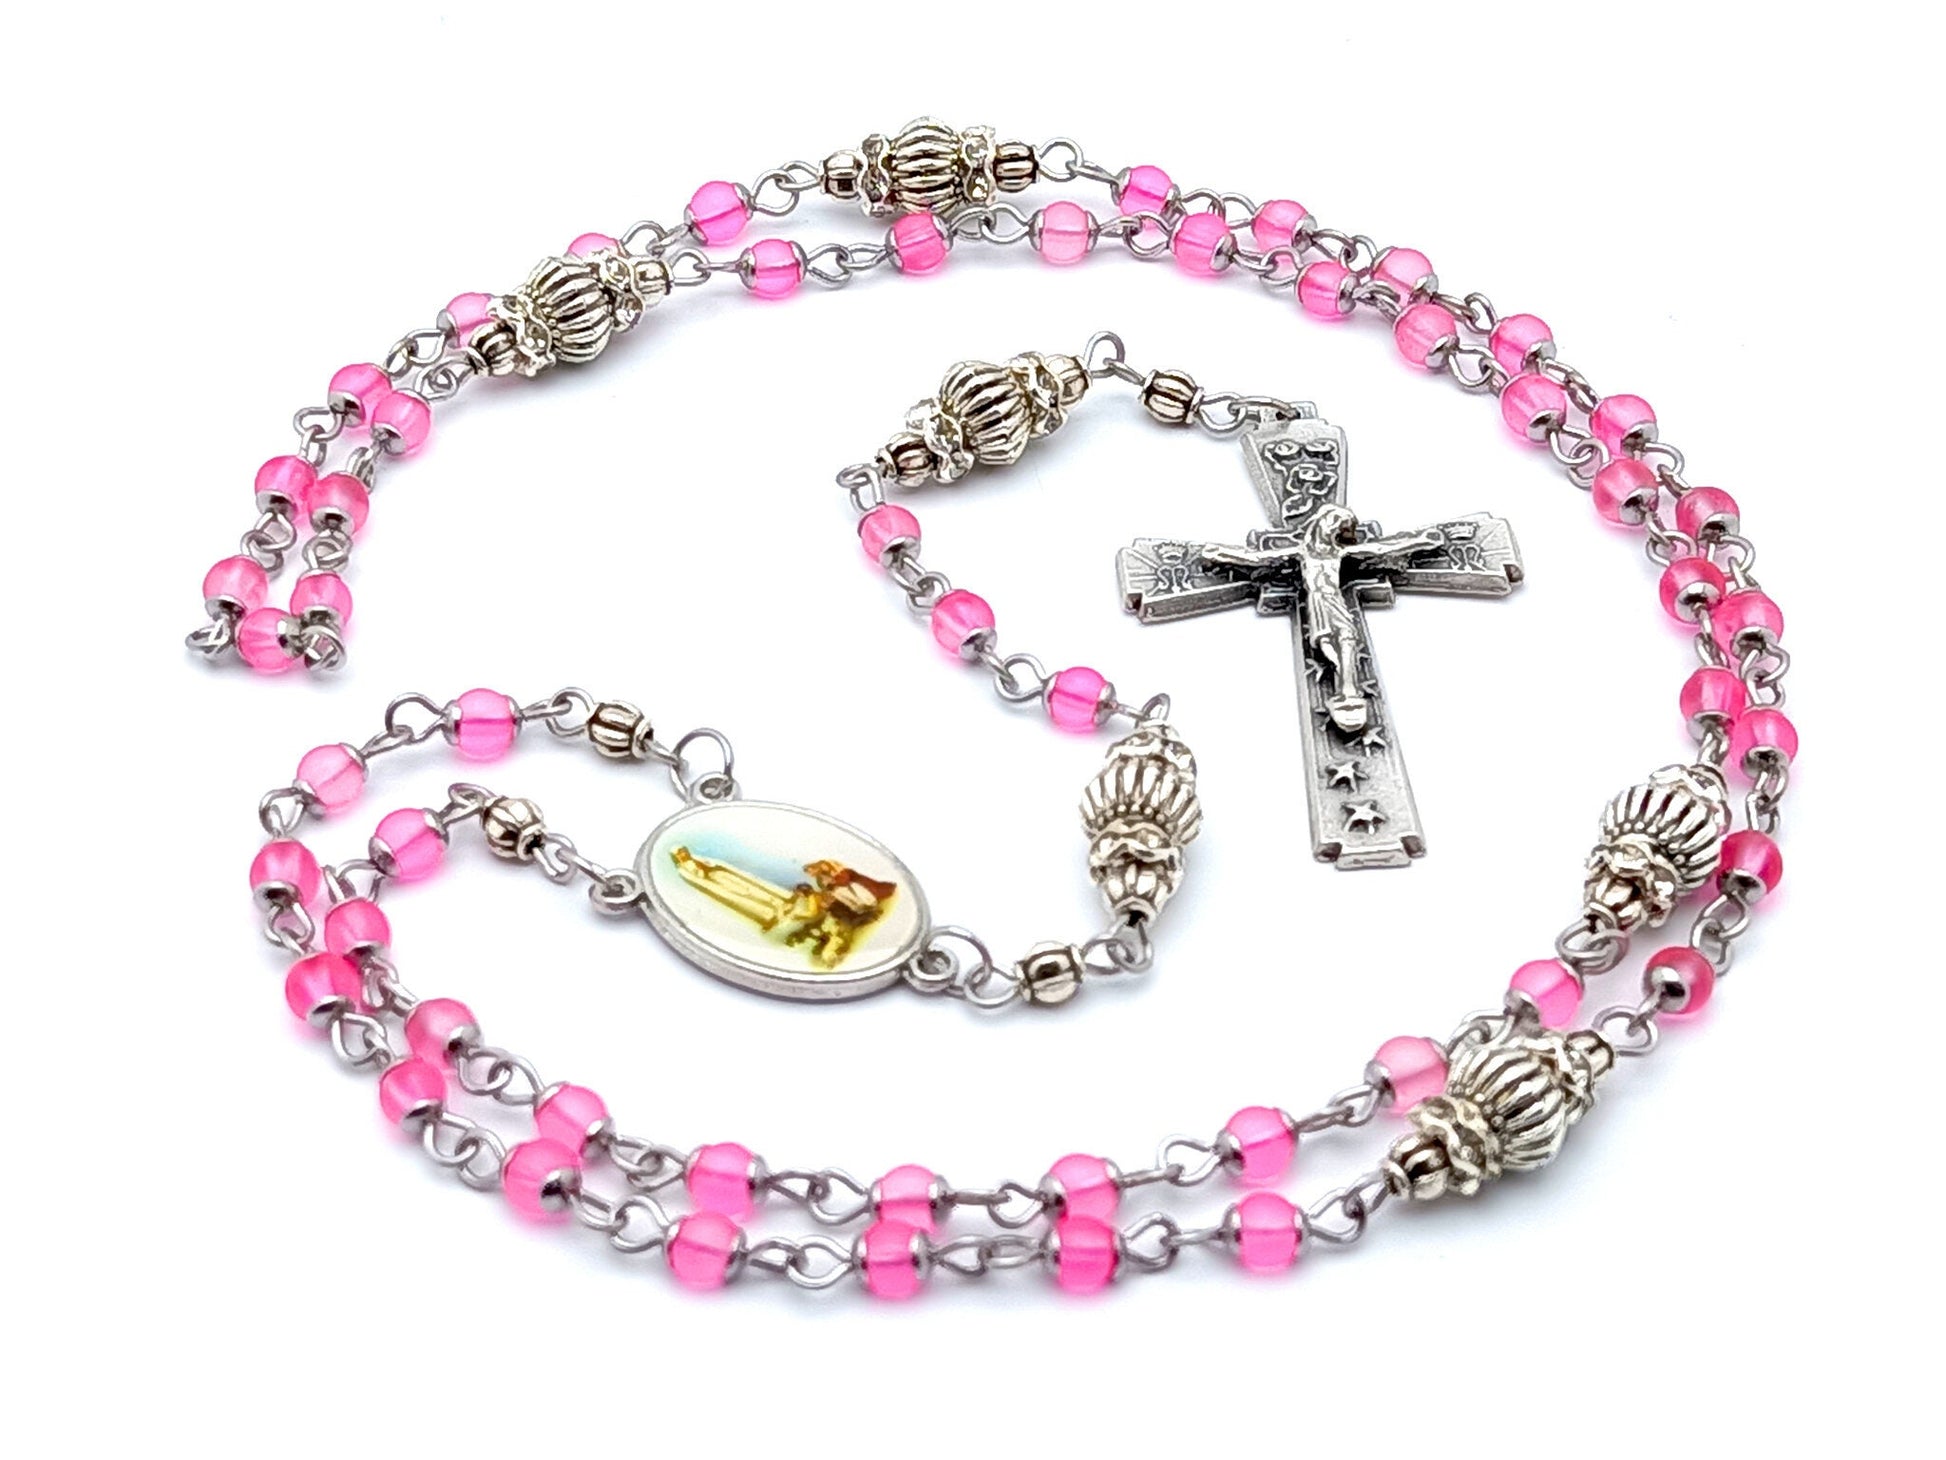 Our Lady of Fatima unique rosary beads miniature rosary with small pink glass and silver beads, silver crucifix and picture centre medal.